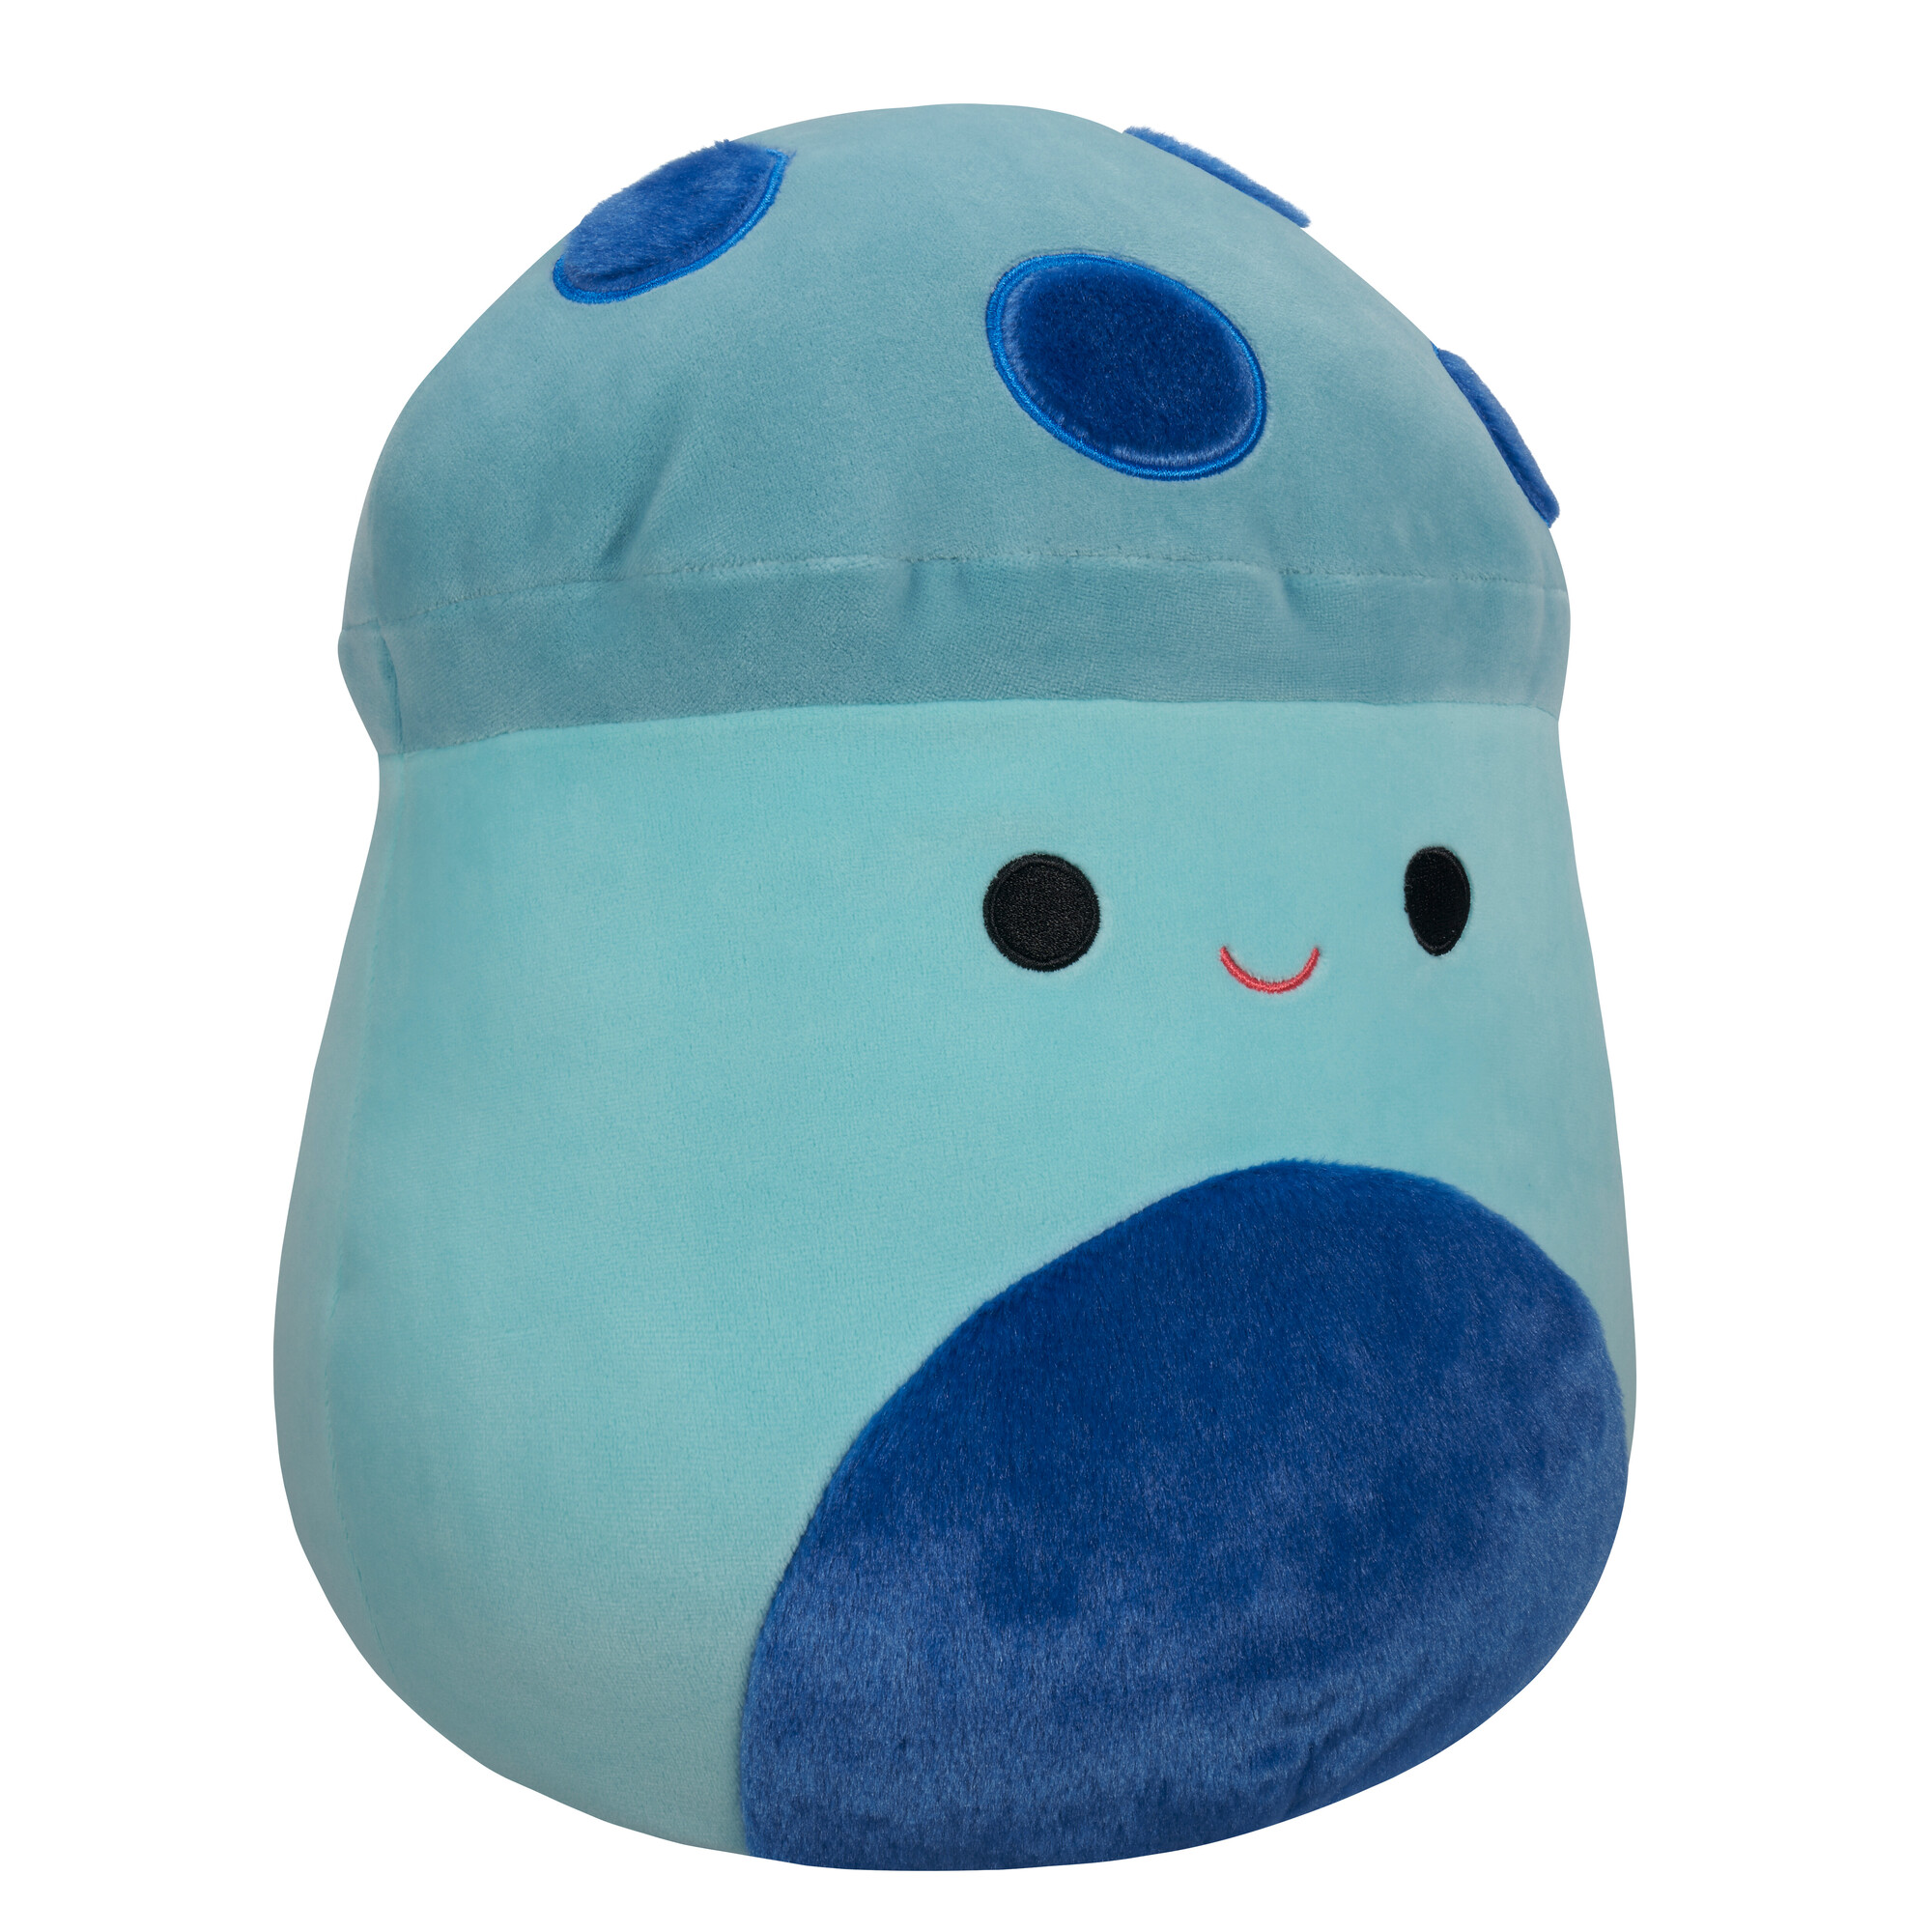 Buy Squishmallows 12-Inch Ankur the Mushroom for GBP 17.99 | Card ...